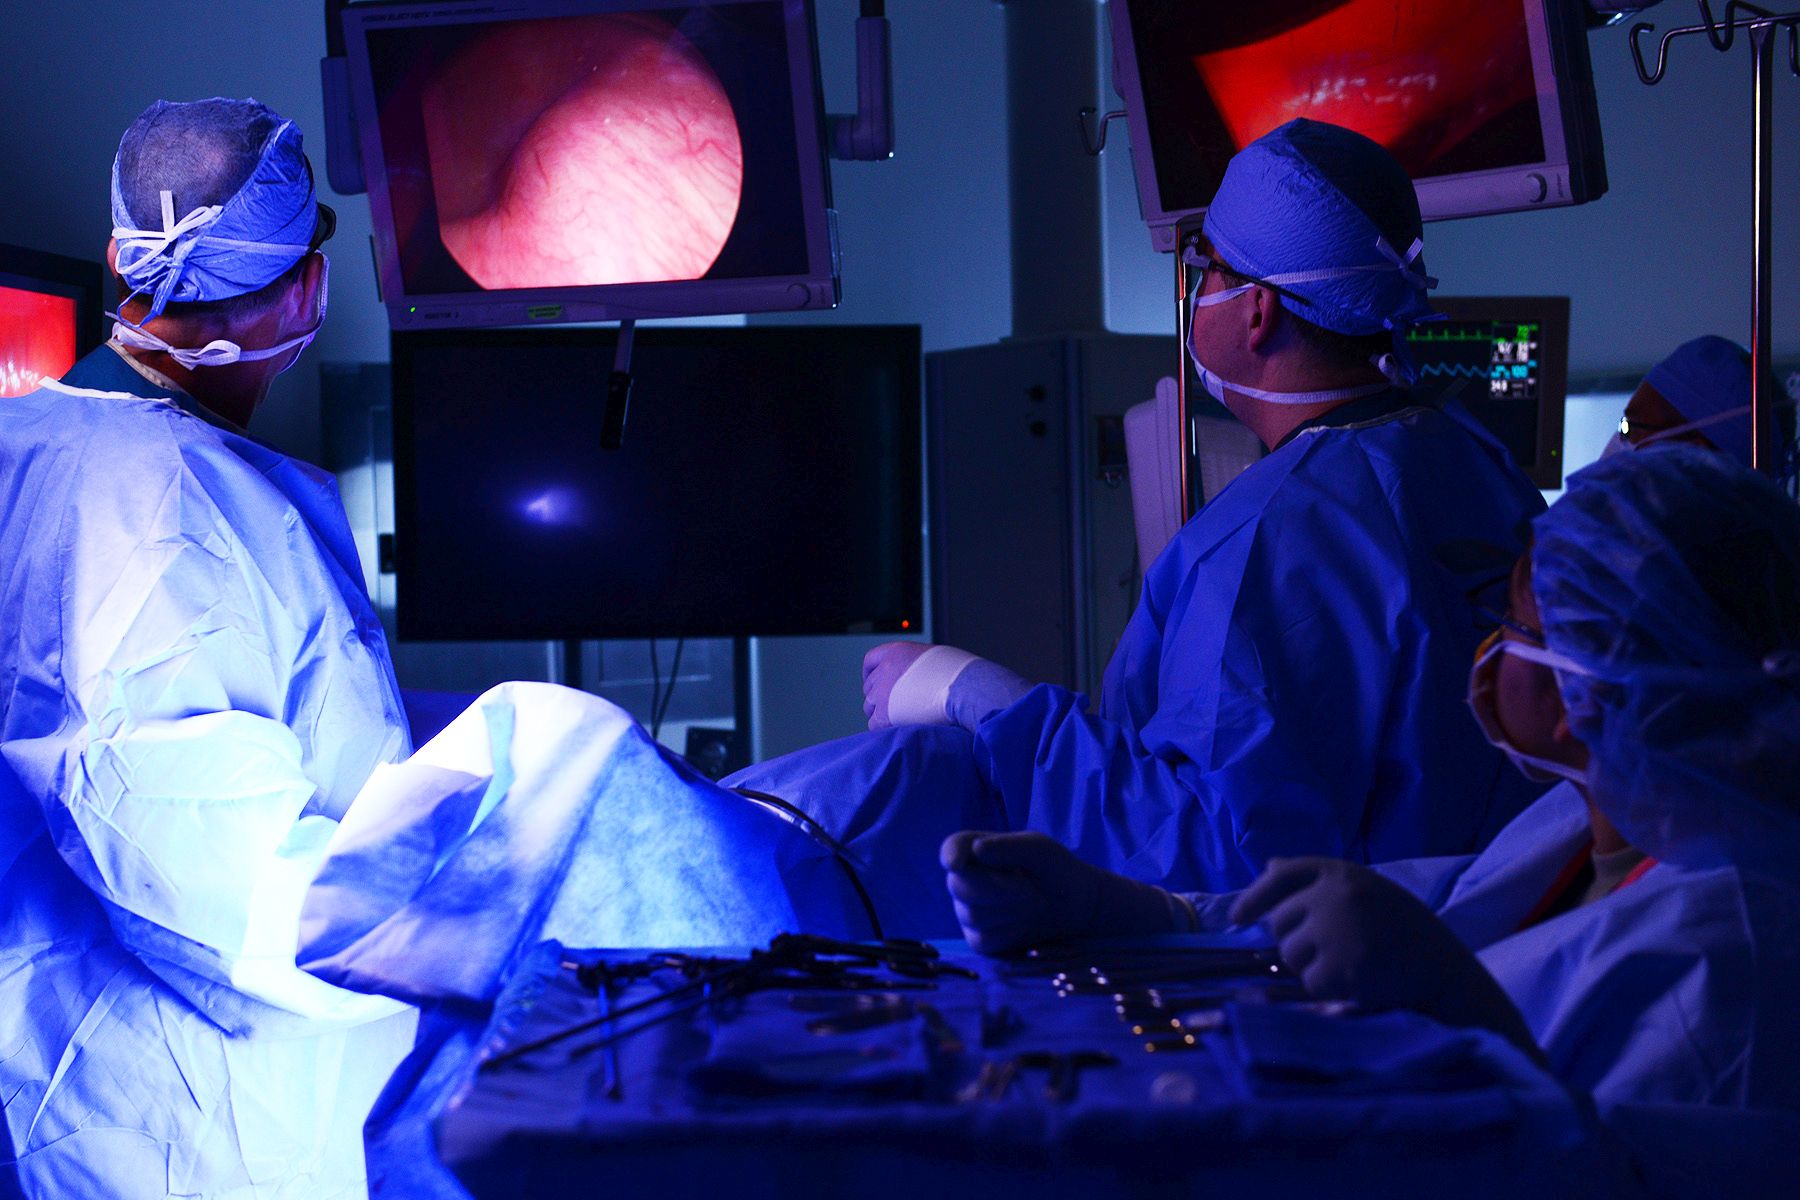 U.S. Air Force Maj. Arthur Greenwood and Capt. Stuart Winkler, 633rd Surgical Operations Squadron obstetricians, stitch up an incision after performing a laparoscopic hysterectomy at Langley Air Force Bae, Va., June 14, 2016.